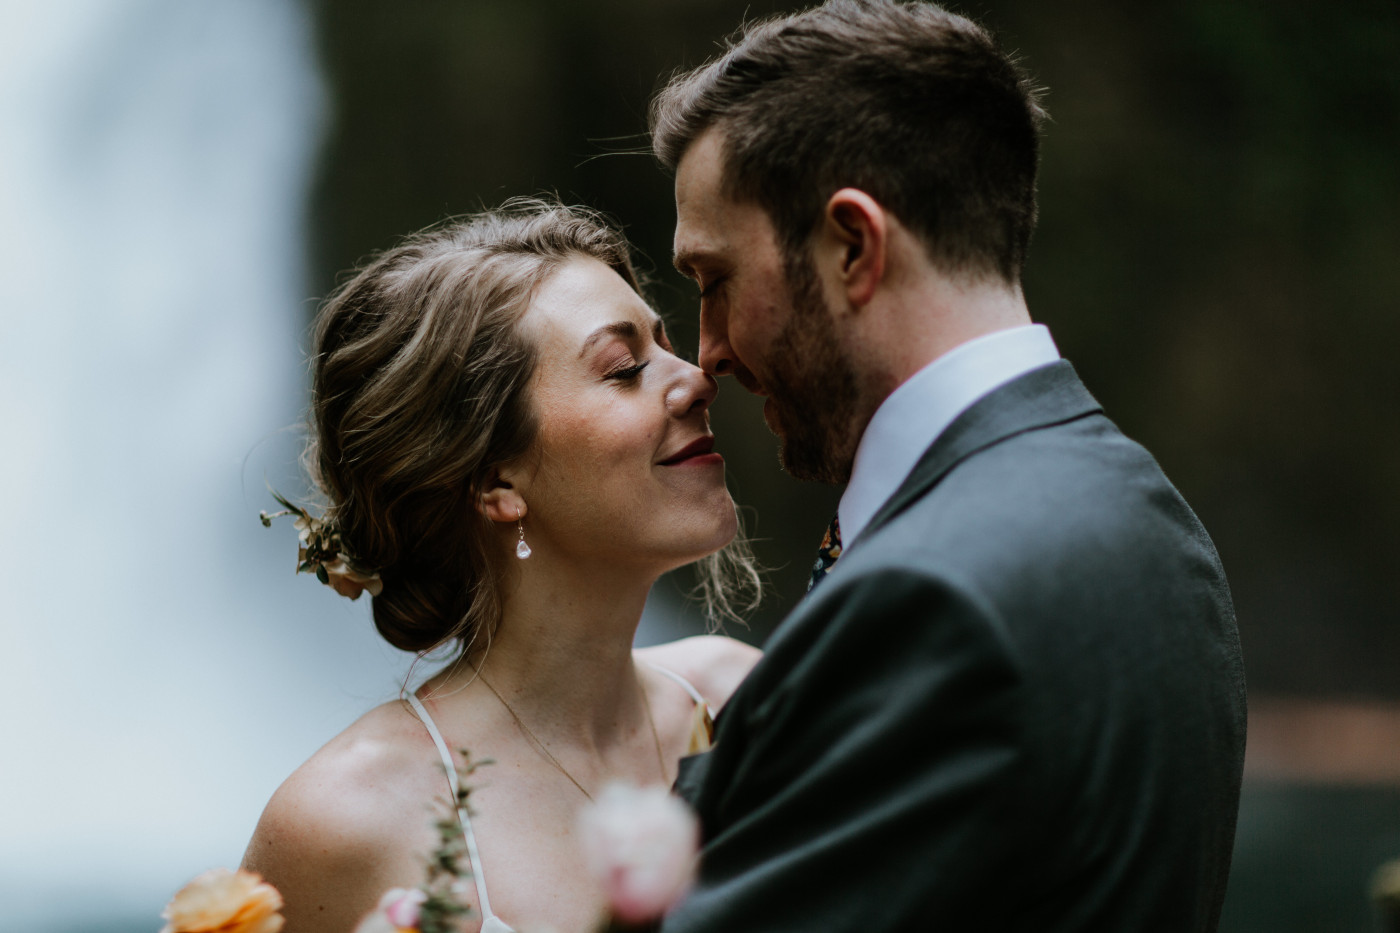 Lennie and Allison go in for a kiss. Elopement photography at Columbia River Gorge by Sienna Plus Josh.